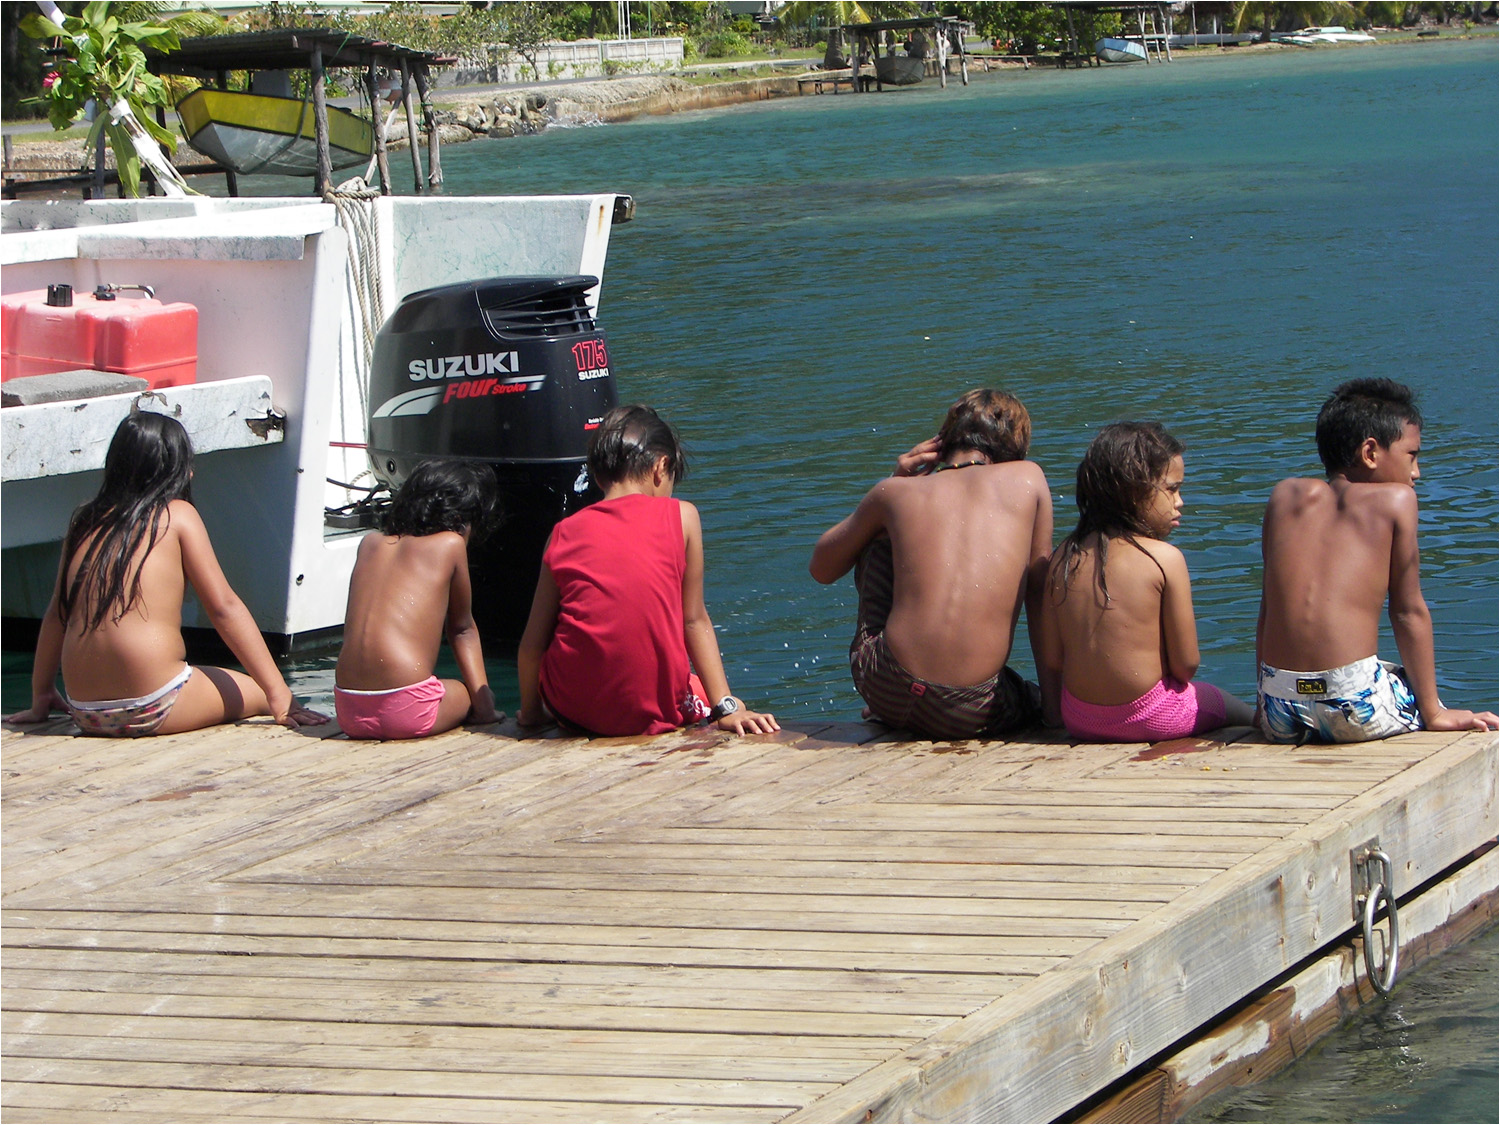 Some local kids swimming from the dock as we waited for our tender back to the ship.